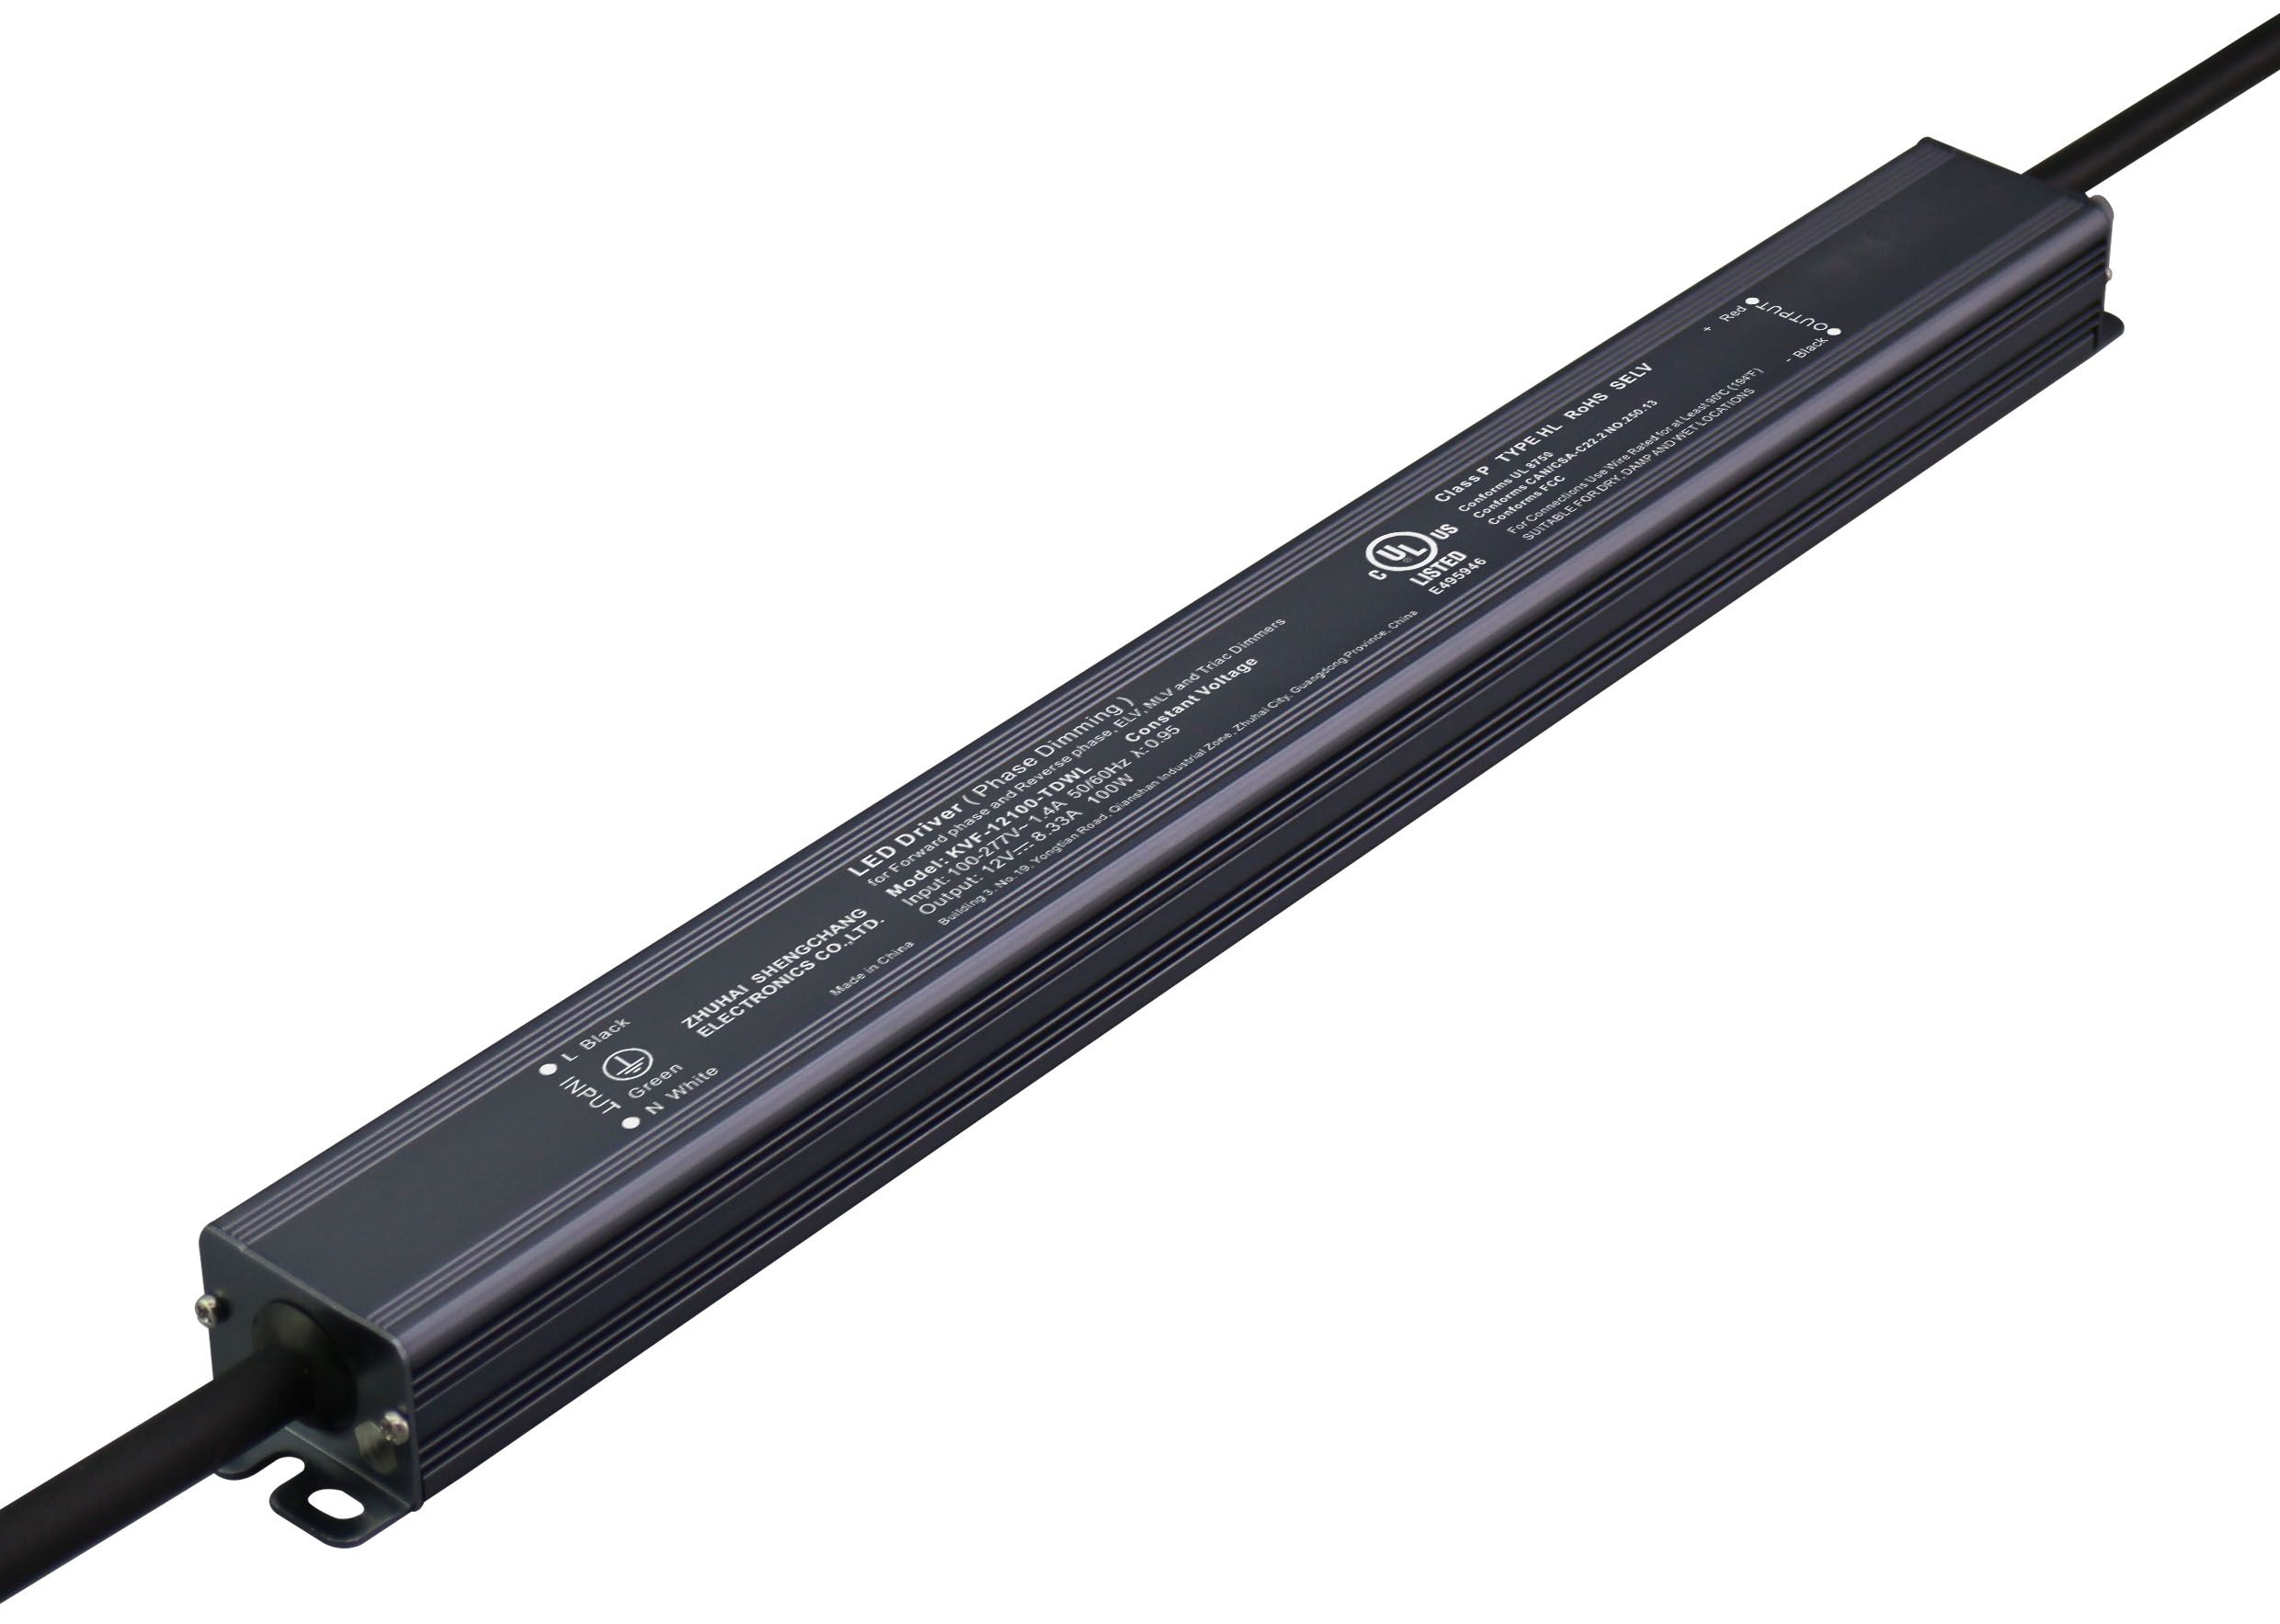 KVF-TDWL Series 100W Constant Voltage Triac Dimmable LED driver